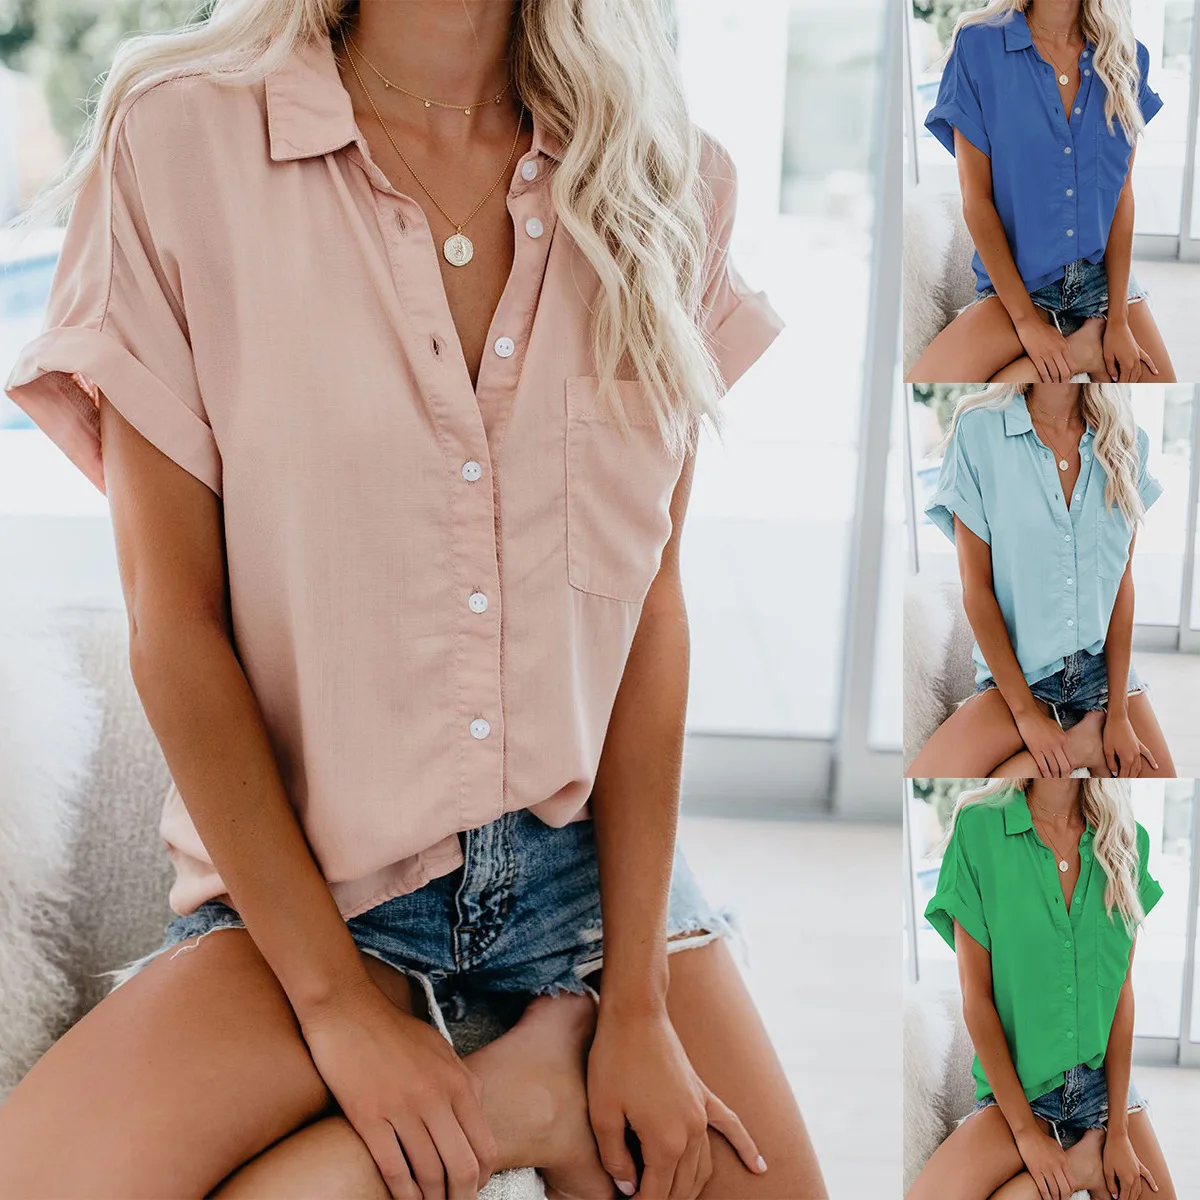 Women's Short Sleeves Shirt Casual Tees Tops Button Down Tunic Shirts Loose Fit Blouse with Pockets